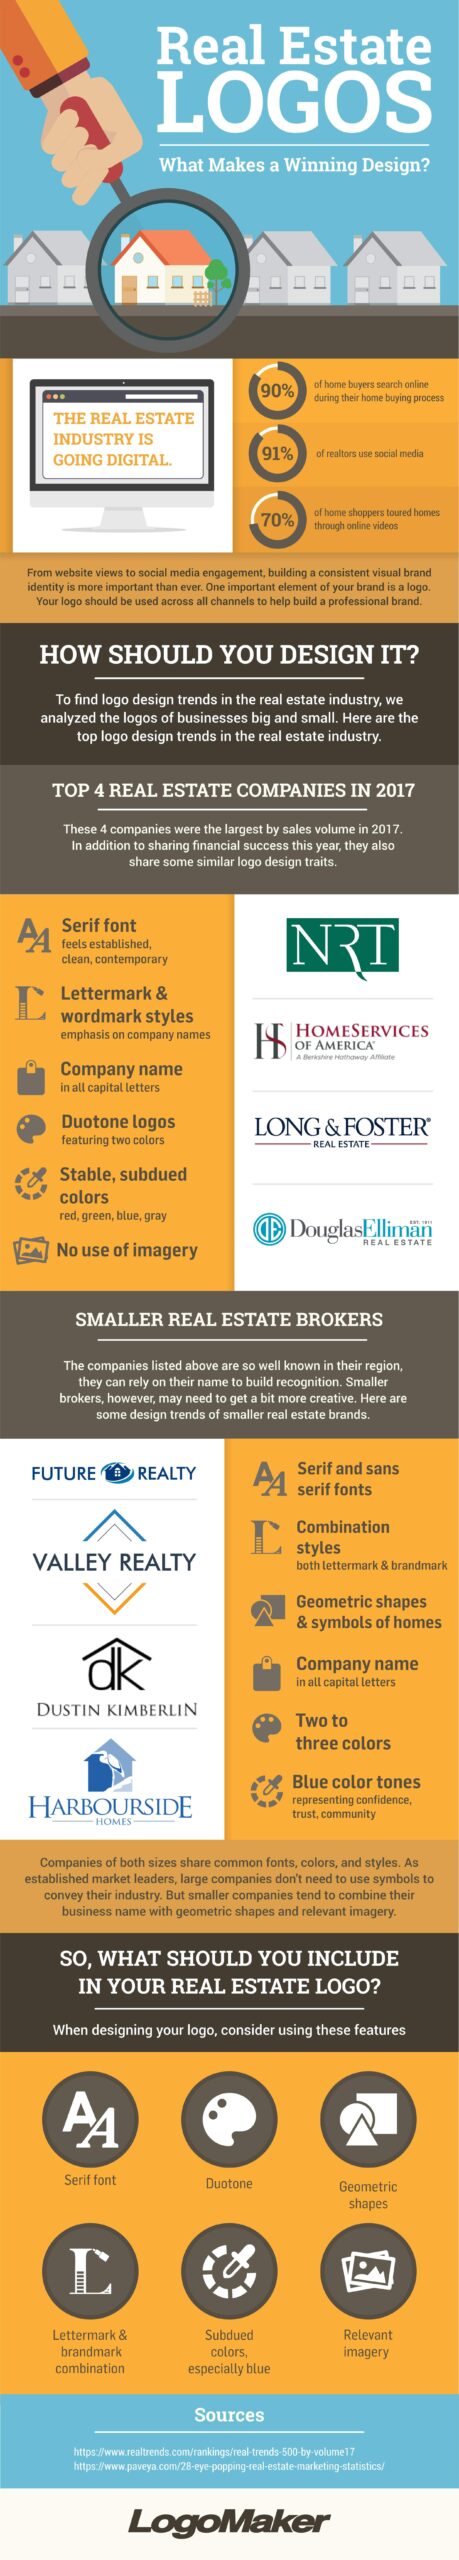 Real Estate Logo Infographic showing top logo design suggestions such as duotone colors serif fonts geometric shapes and subdued colors especially blue